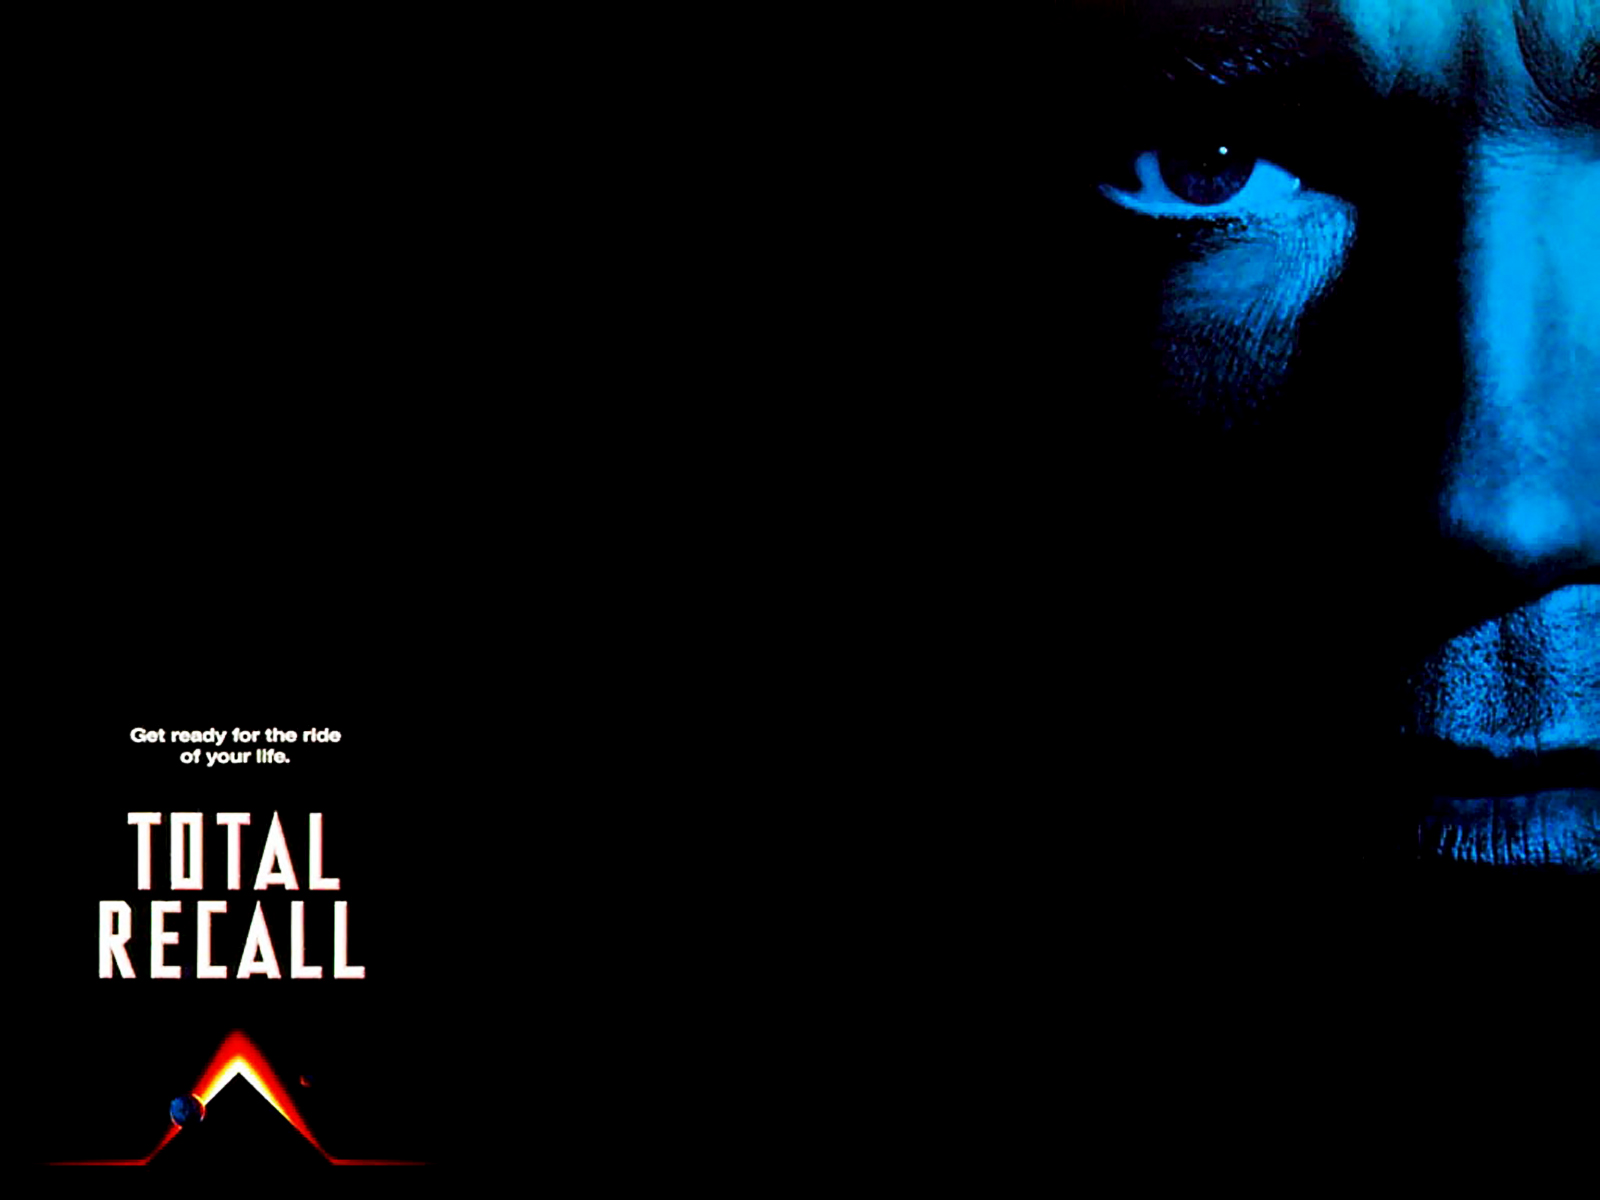 Total Recall Movie HD Wallpaper And Poster Image To